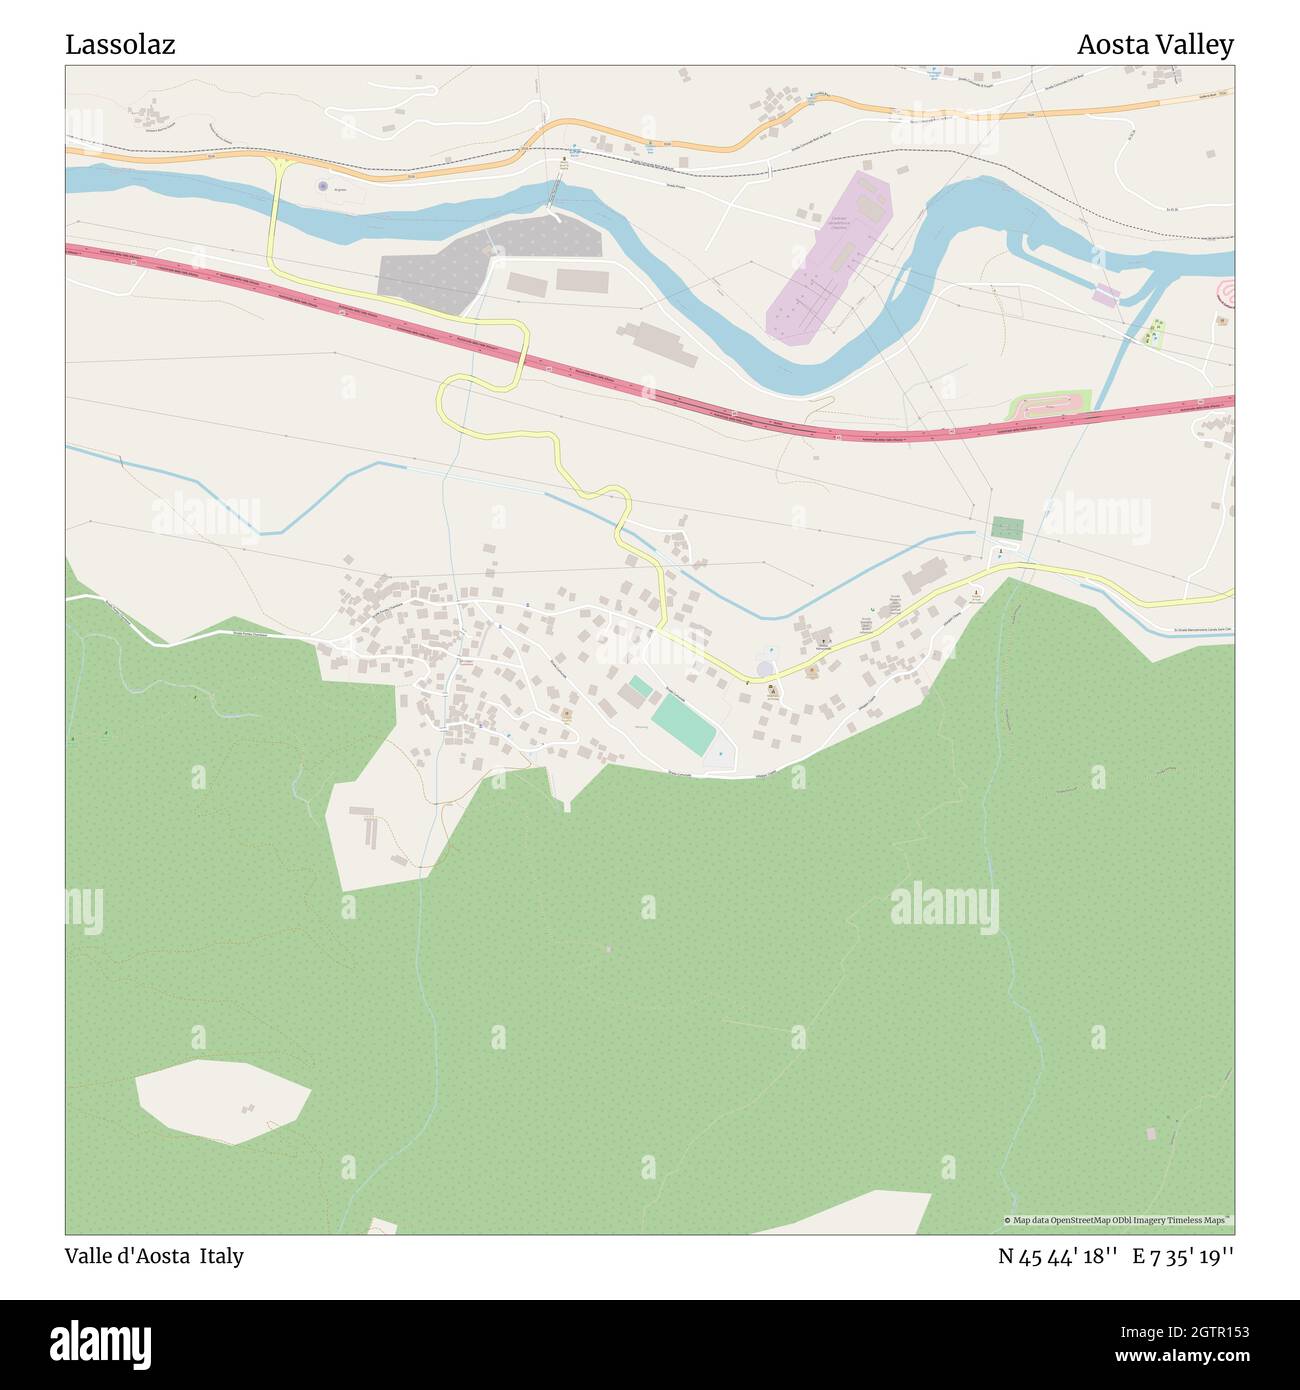 Lassolaz, Valle d'Aosta, Italy, Aosta Valley, N 45 44' 18'', E 7 35' 19'', map, Timeless Map published in 2021. Travelers, explorers and adventurers like Florence Nightingale, David Livingstone, Ernest Shackleton, Lewis and Clark and Sherlock Holmes relied on maps to plan travels to the world's most remote corners, Timeless Maps is mapping most locations on the globe, showing the achievement of great dreams Stock Photo